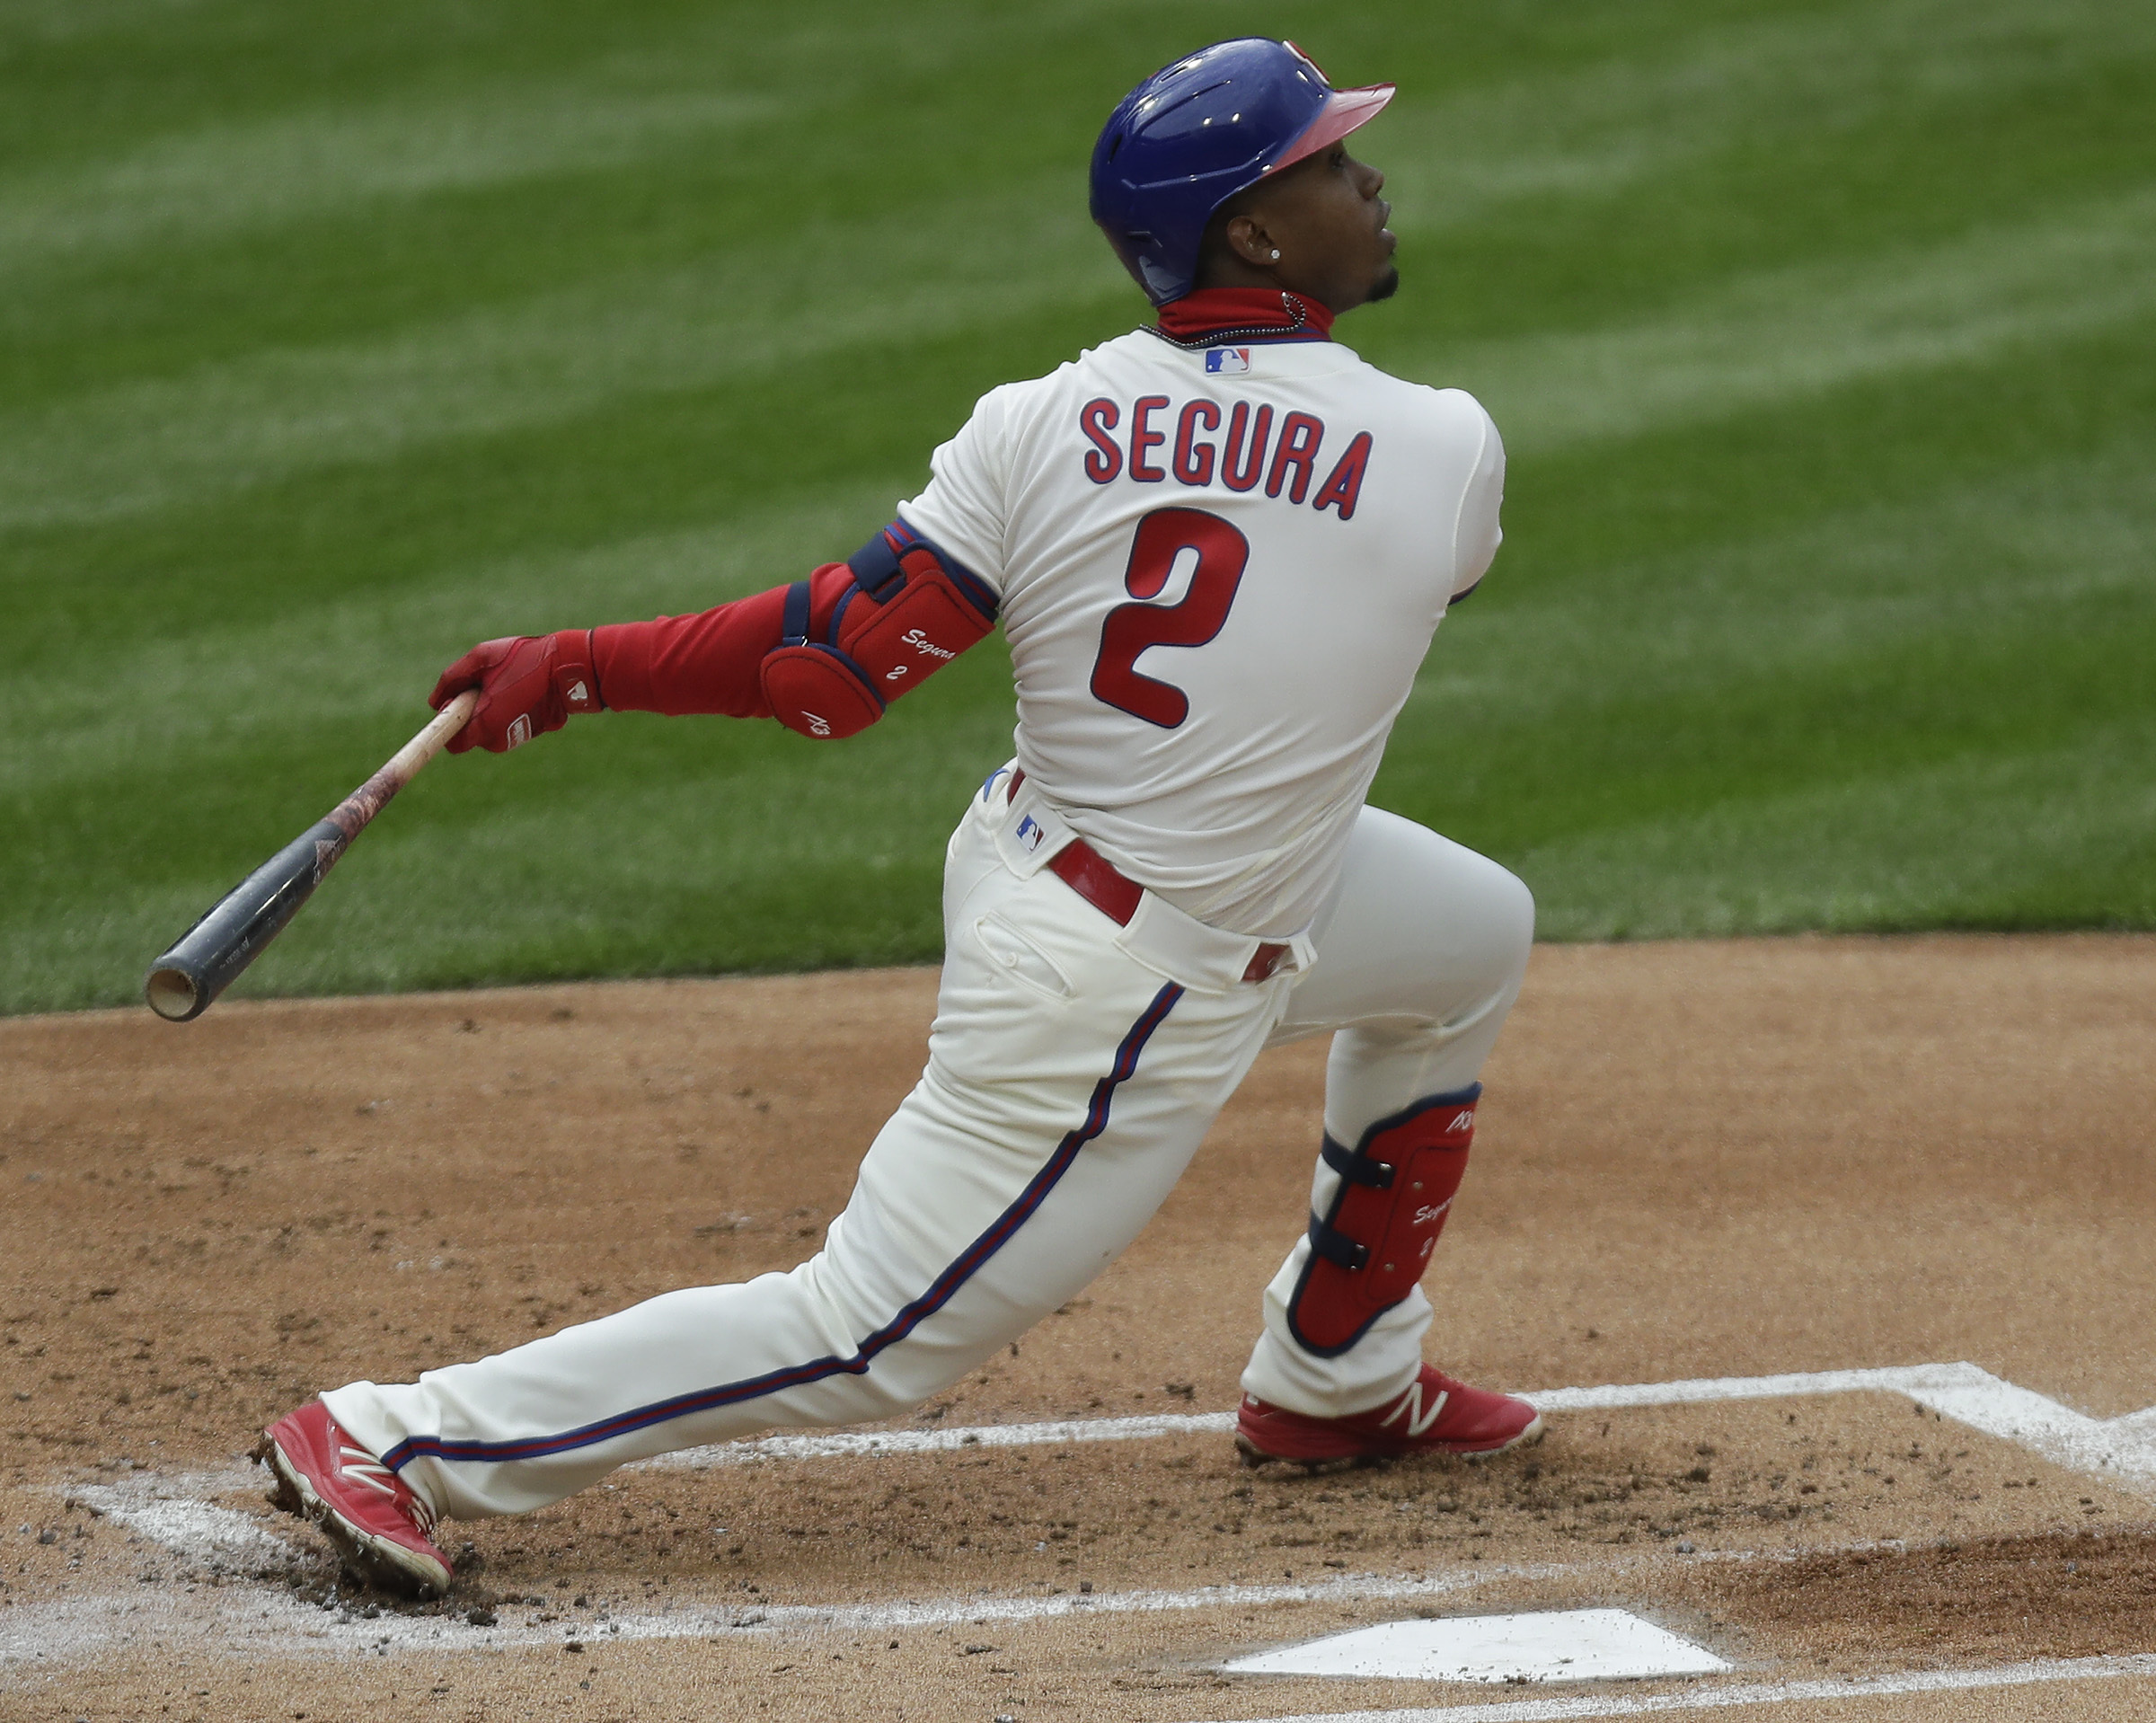 Jean Segura's value to Phillies was evident upon his return to lineup